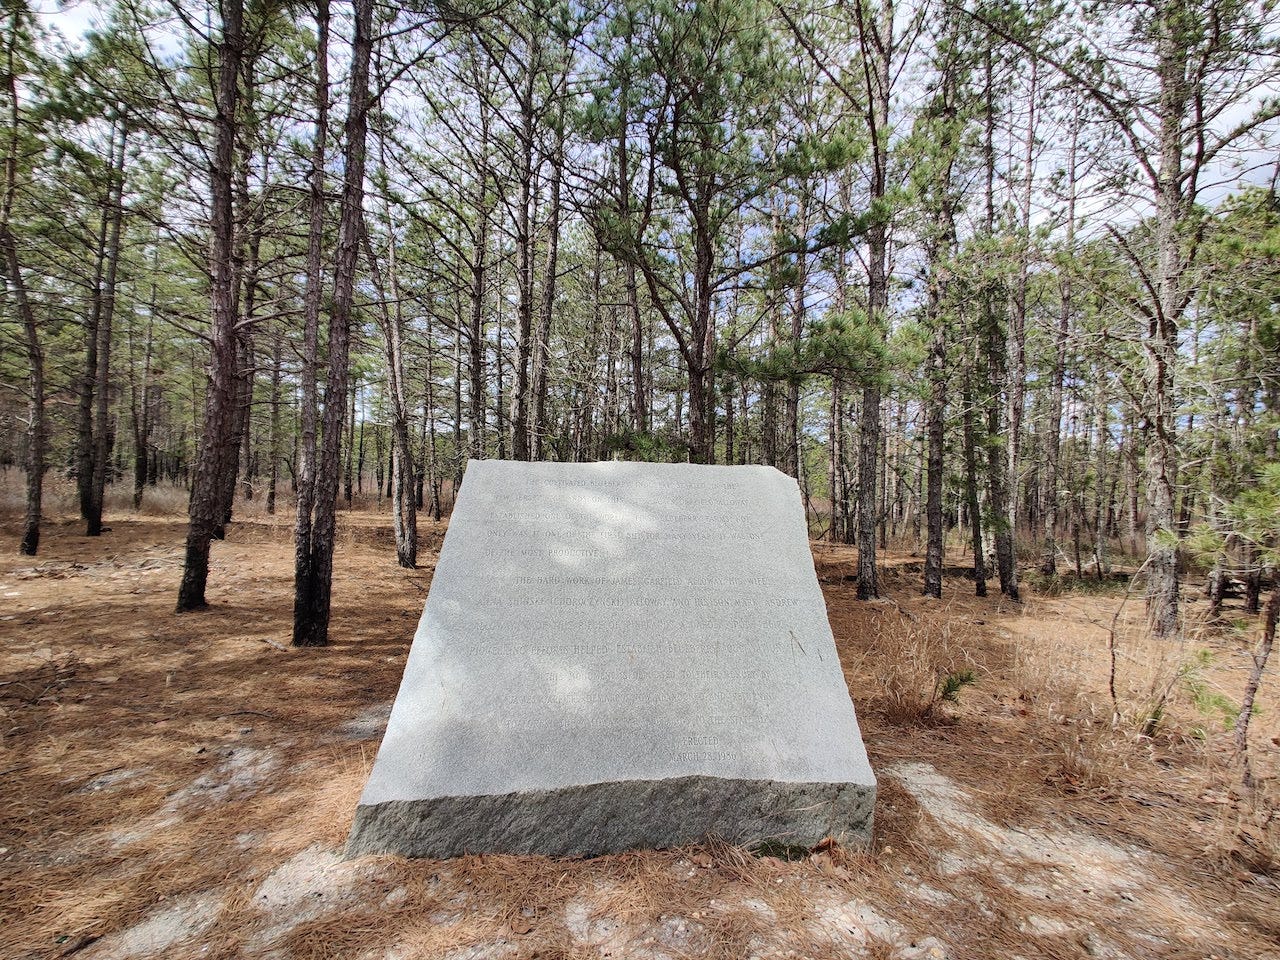 A white granite hulking trapezoid in the pines